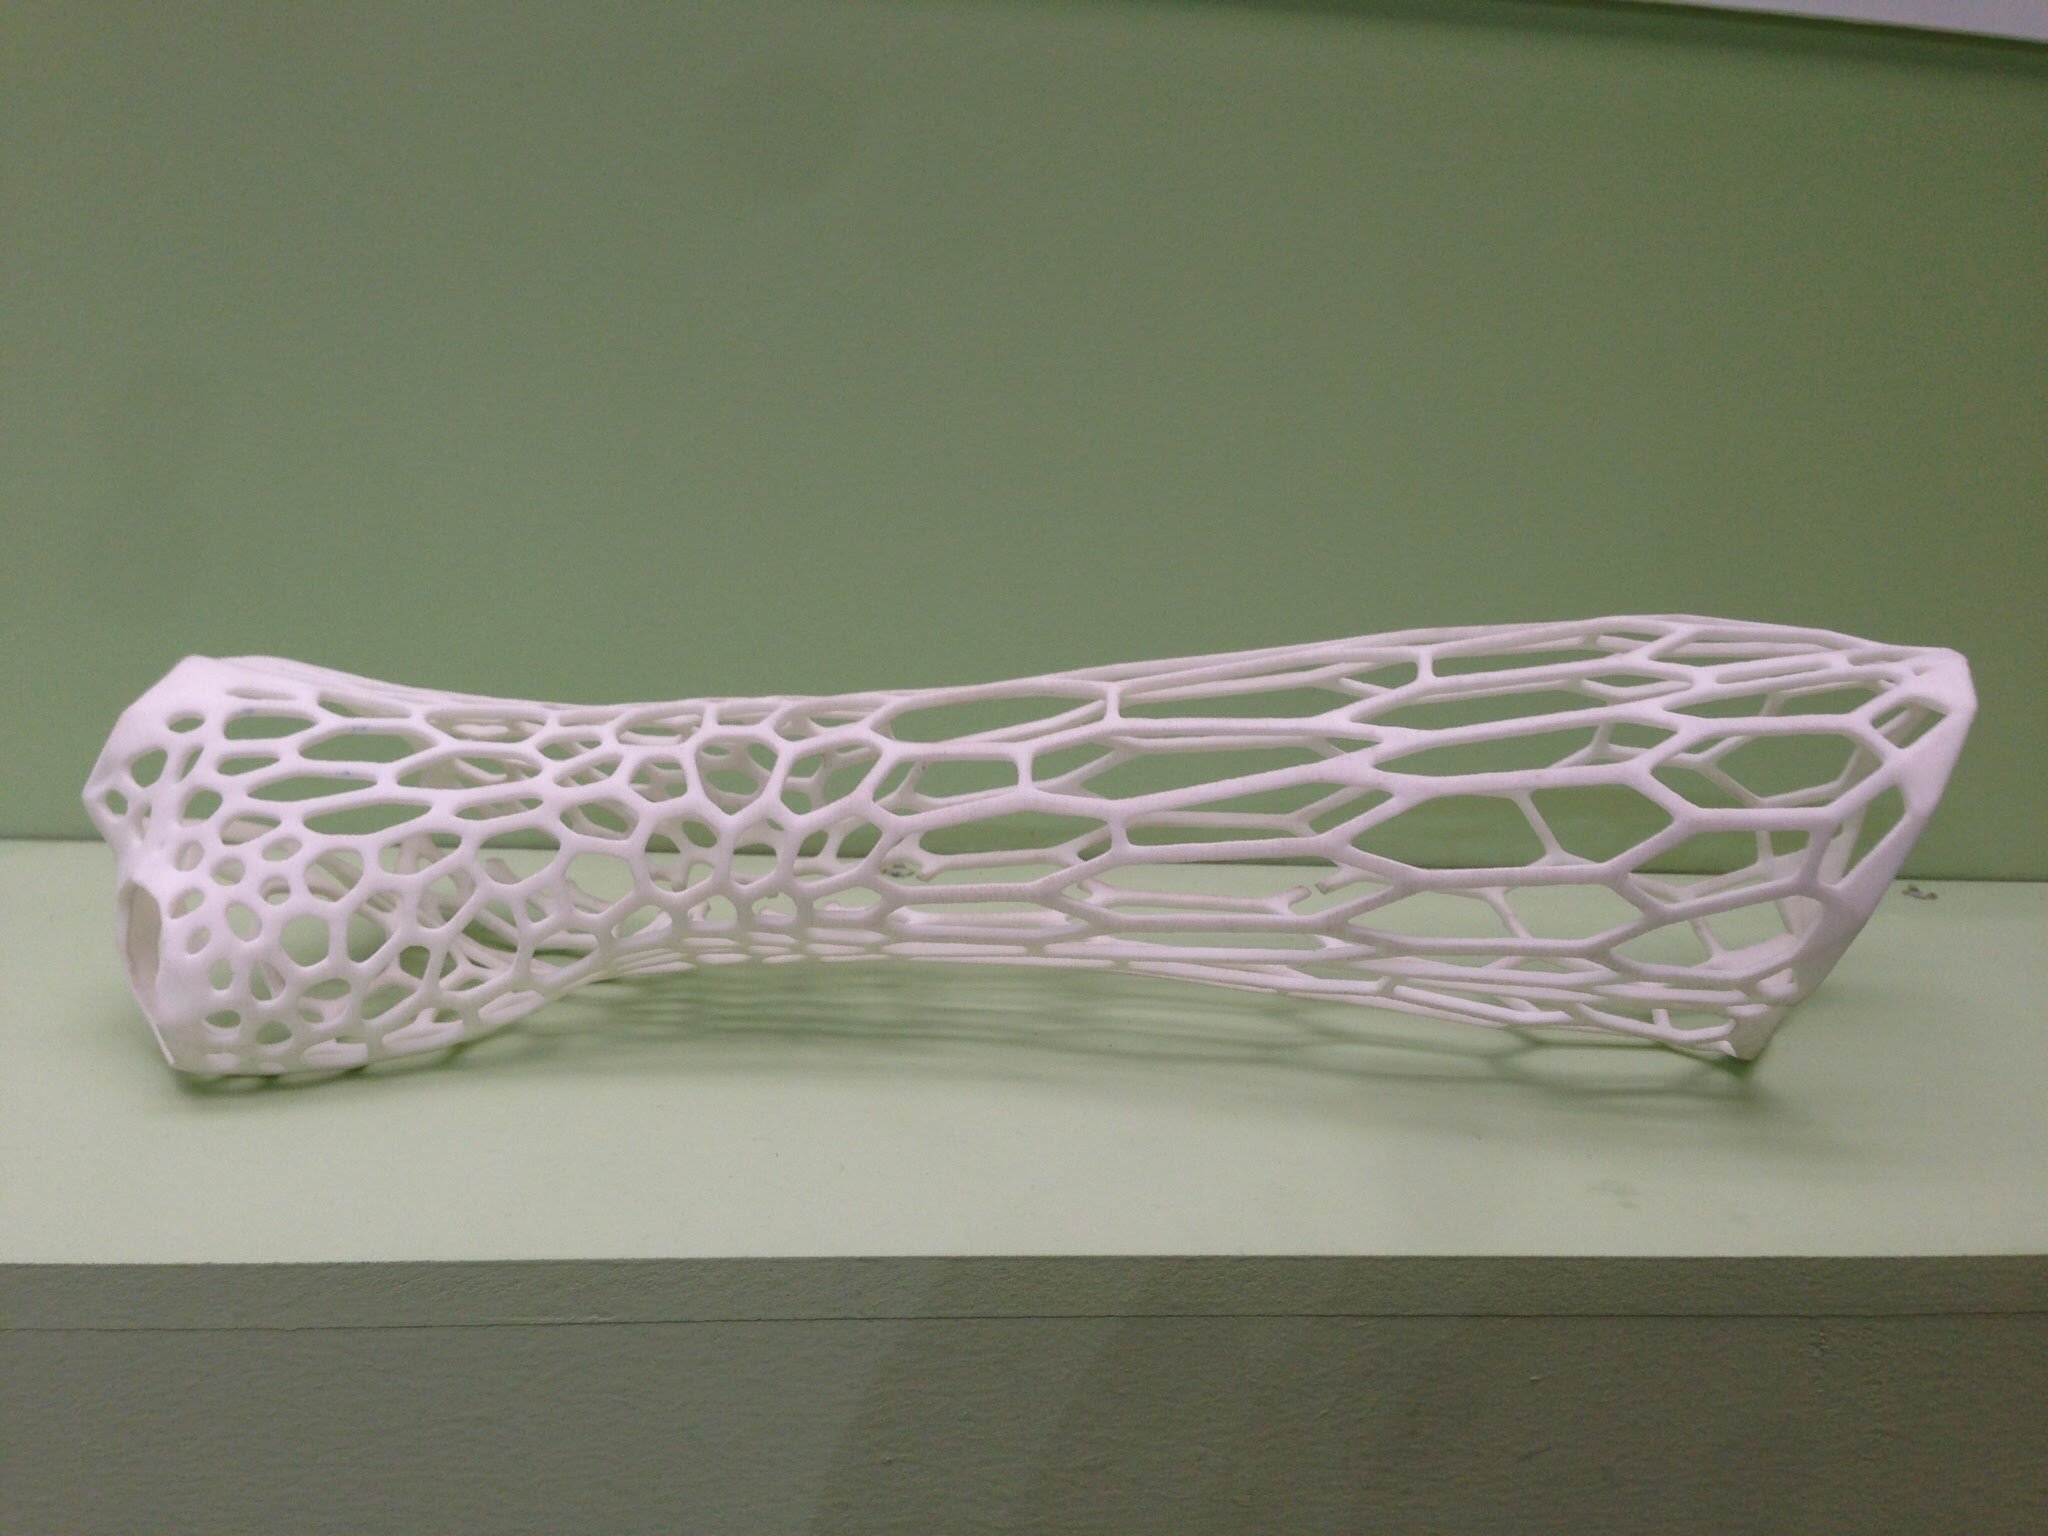  An early attempt at a 3D printed cast, made in 2013 